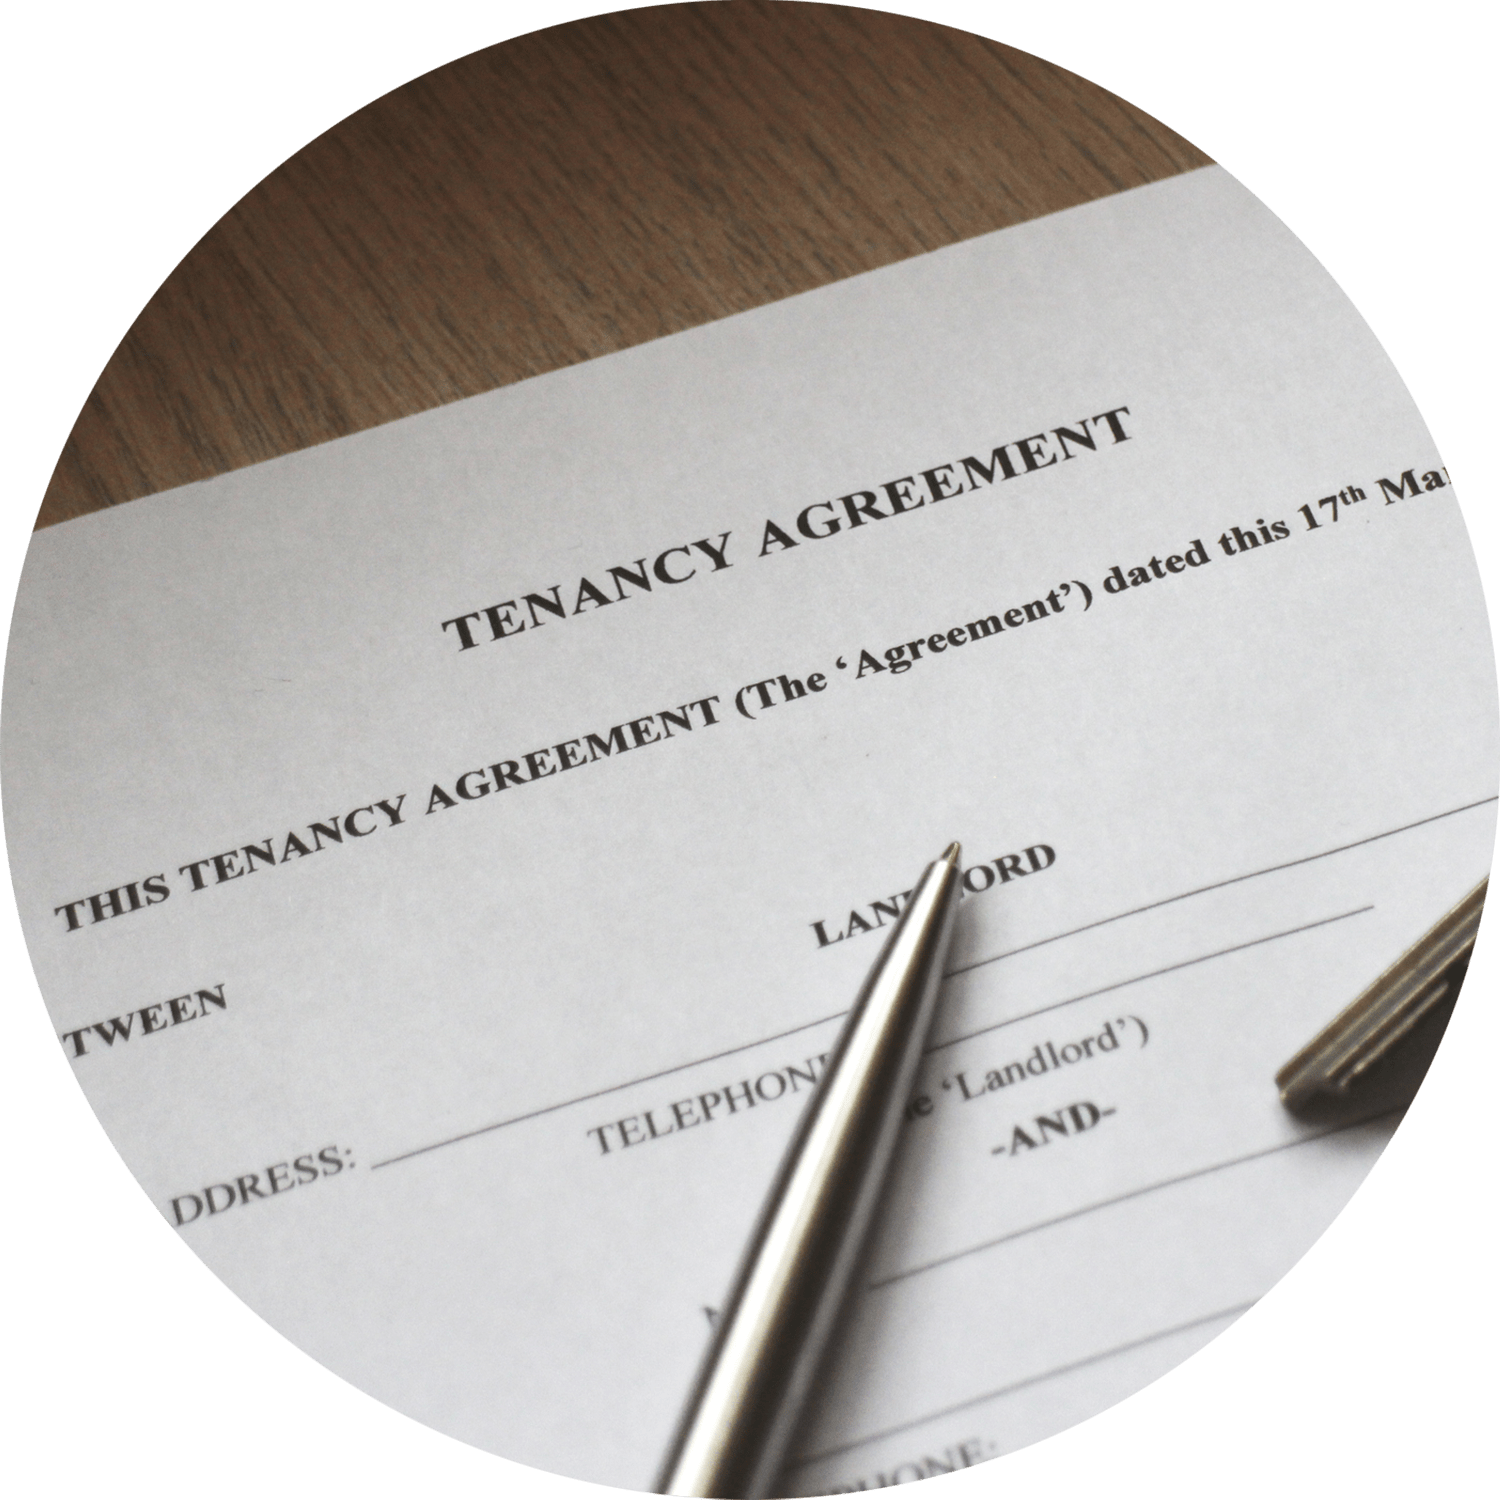 A silver pen on top of a piece of paper with the title "Tenancy Agreement".